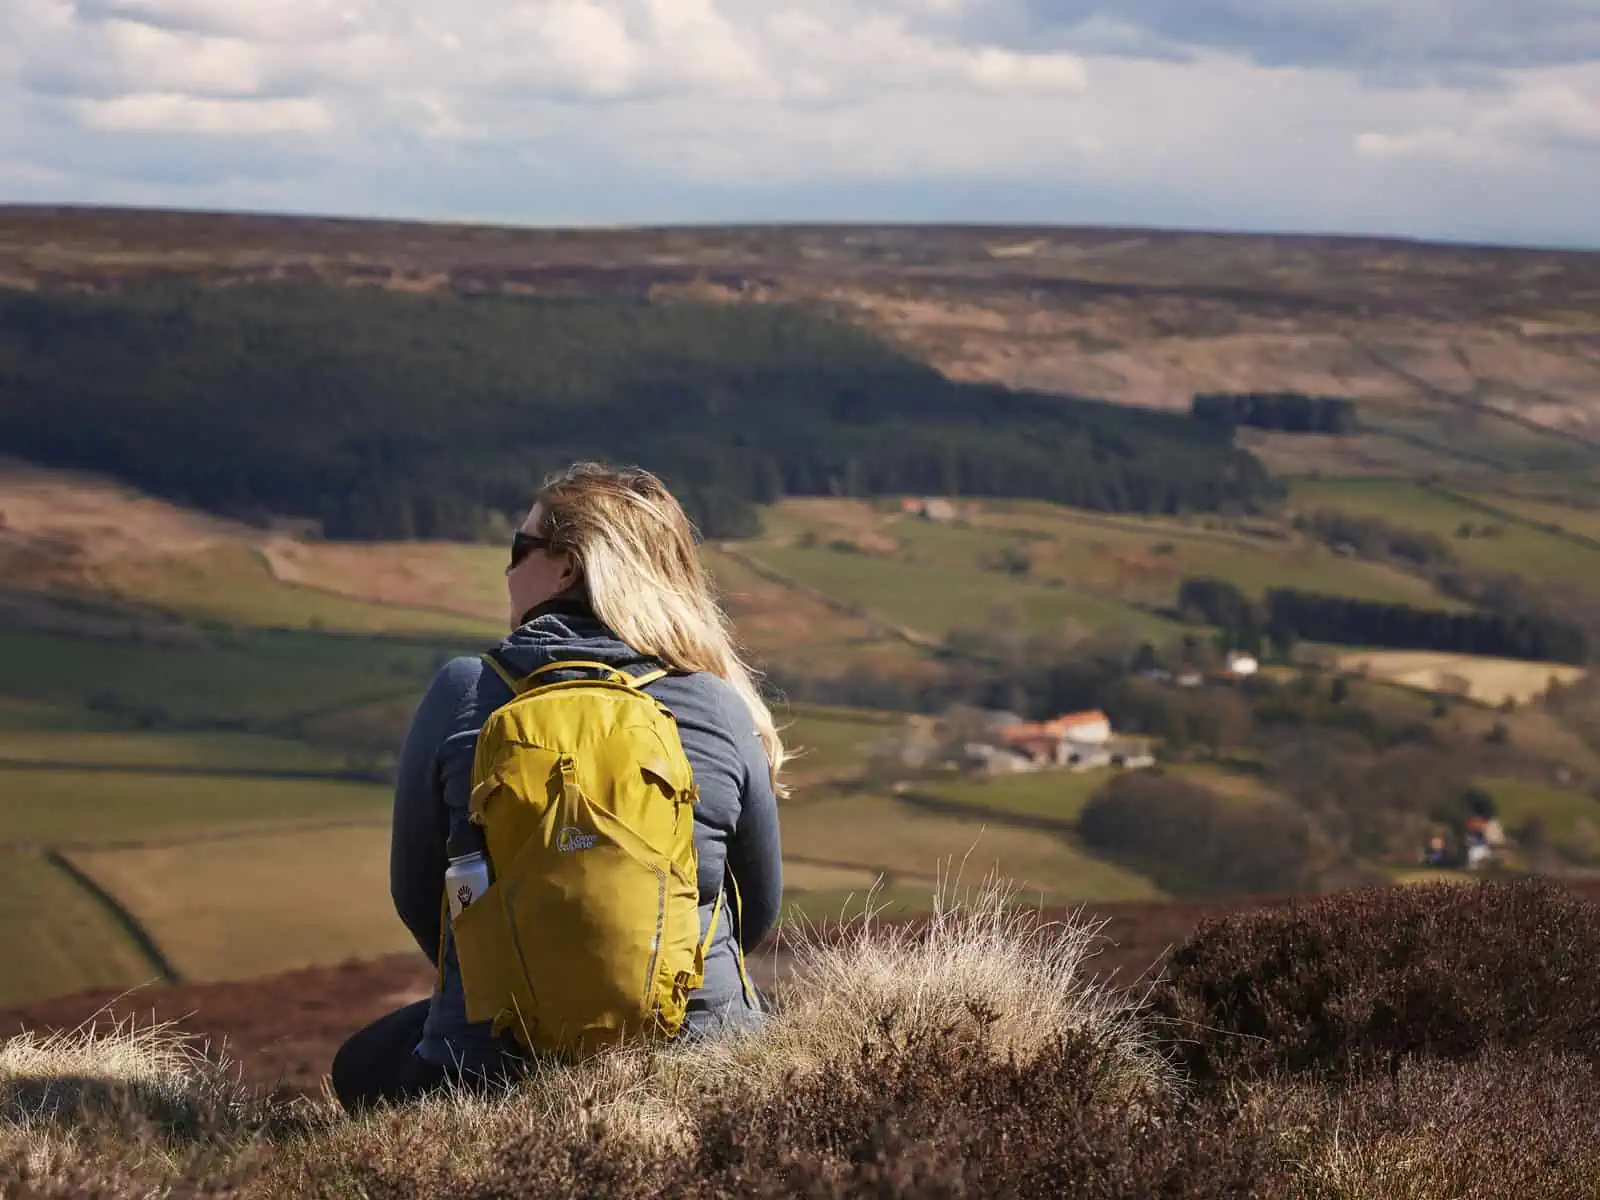 Image description: A landscape image. Fay sits at the top of the hill to the left of the frame and is facing away from the camera. Hair is over the right shoulder and Fay looks out to the left with black sunglasses on. Fay wears a yellow bag with a blue jacket and black trousers. There is a silver bottle in the side pouch of Fay’s bag. Fay takes in the view of the hills in the background which have green fields along them. The sky is blue with some clouds.